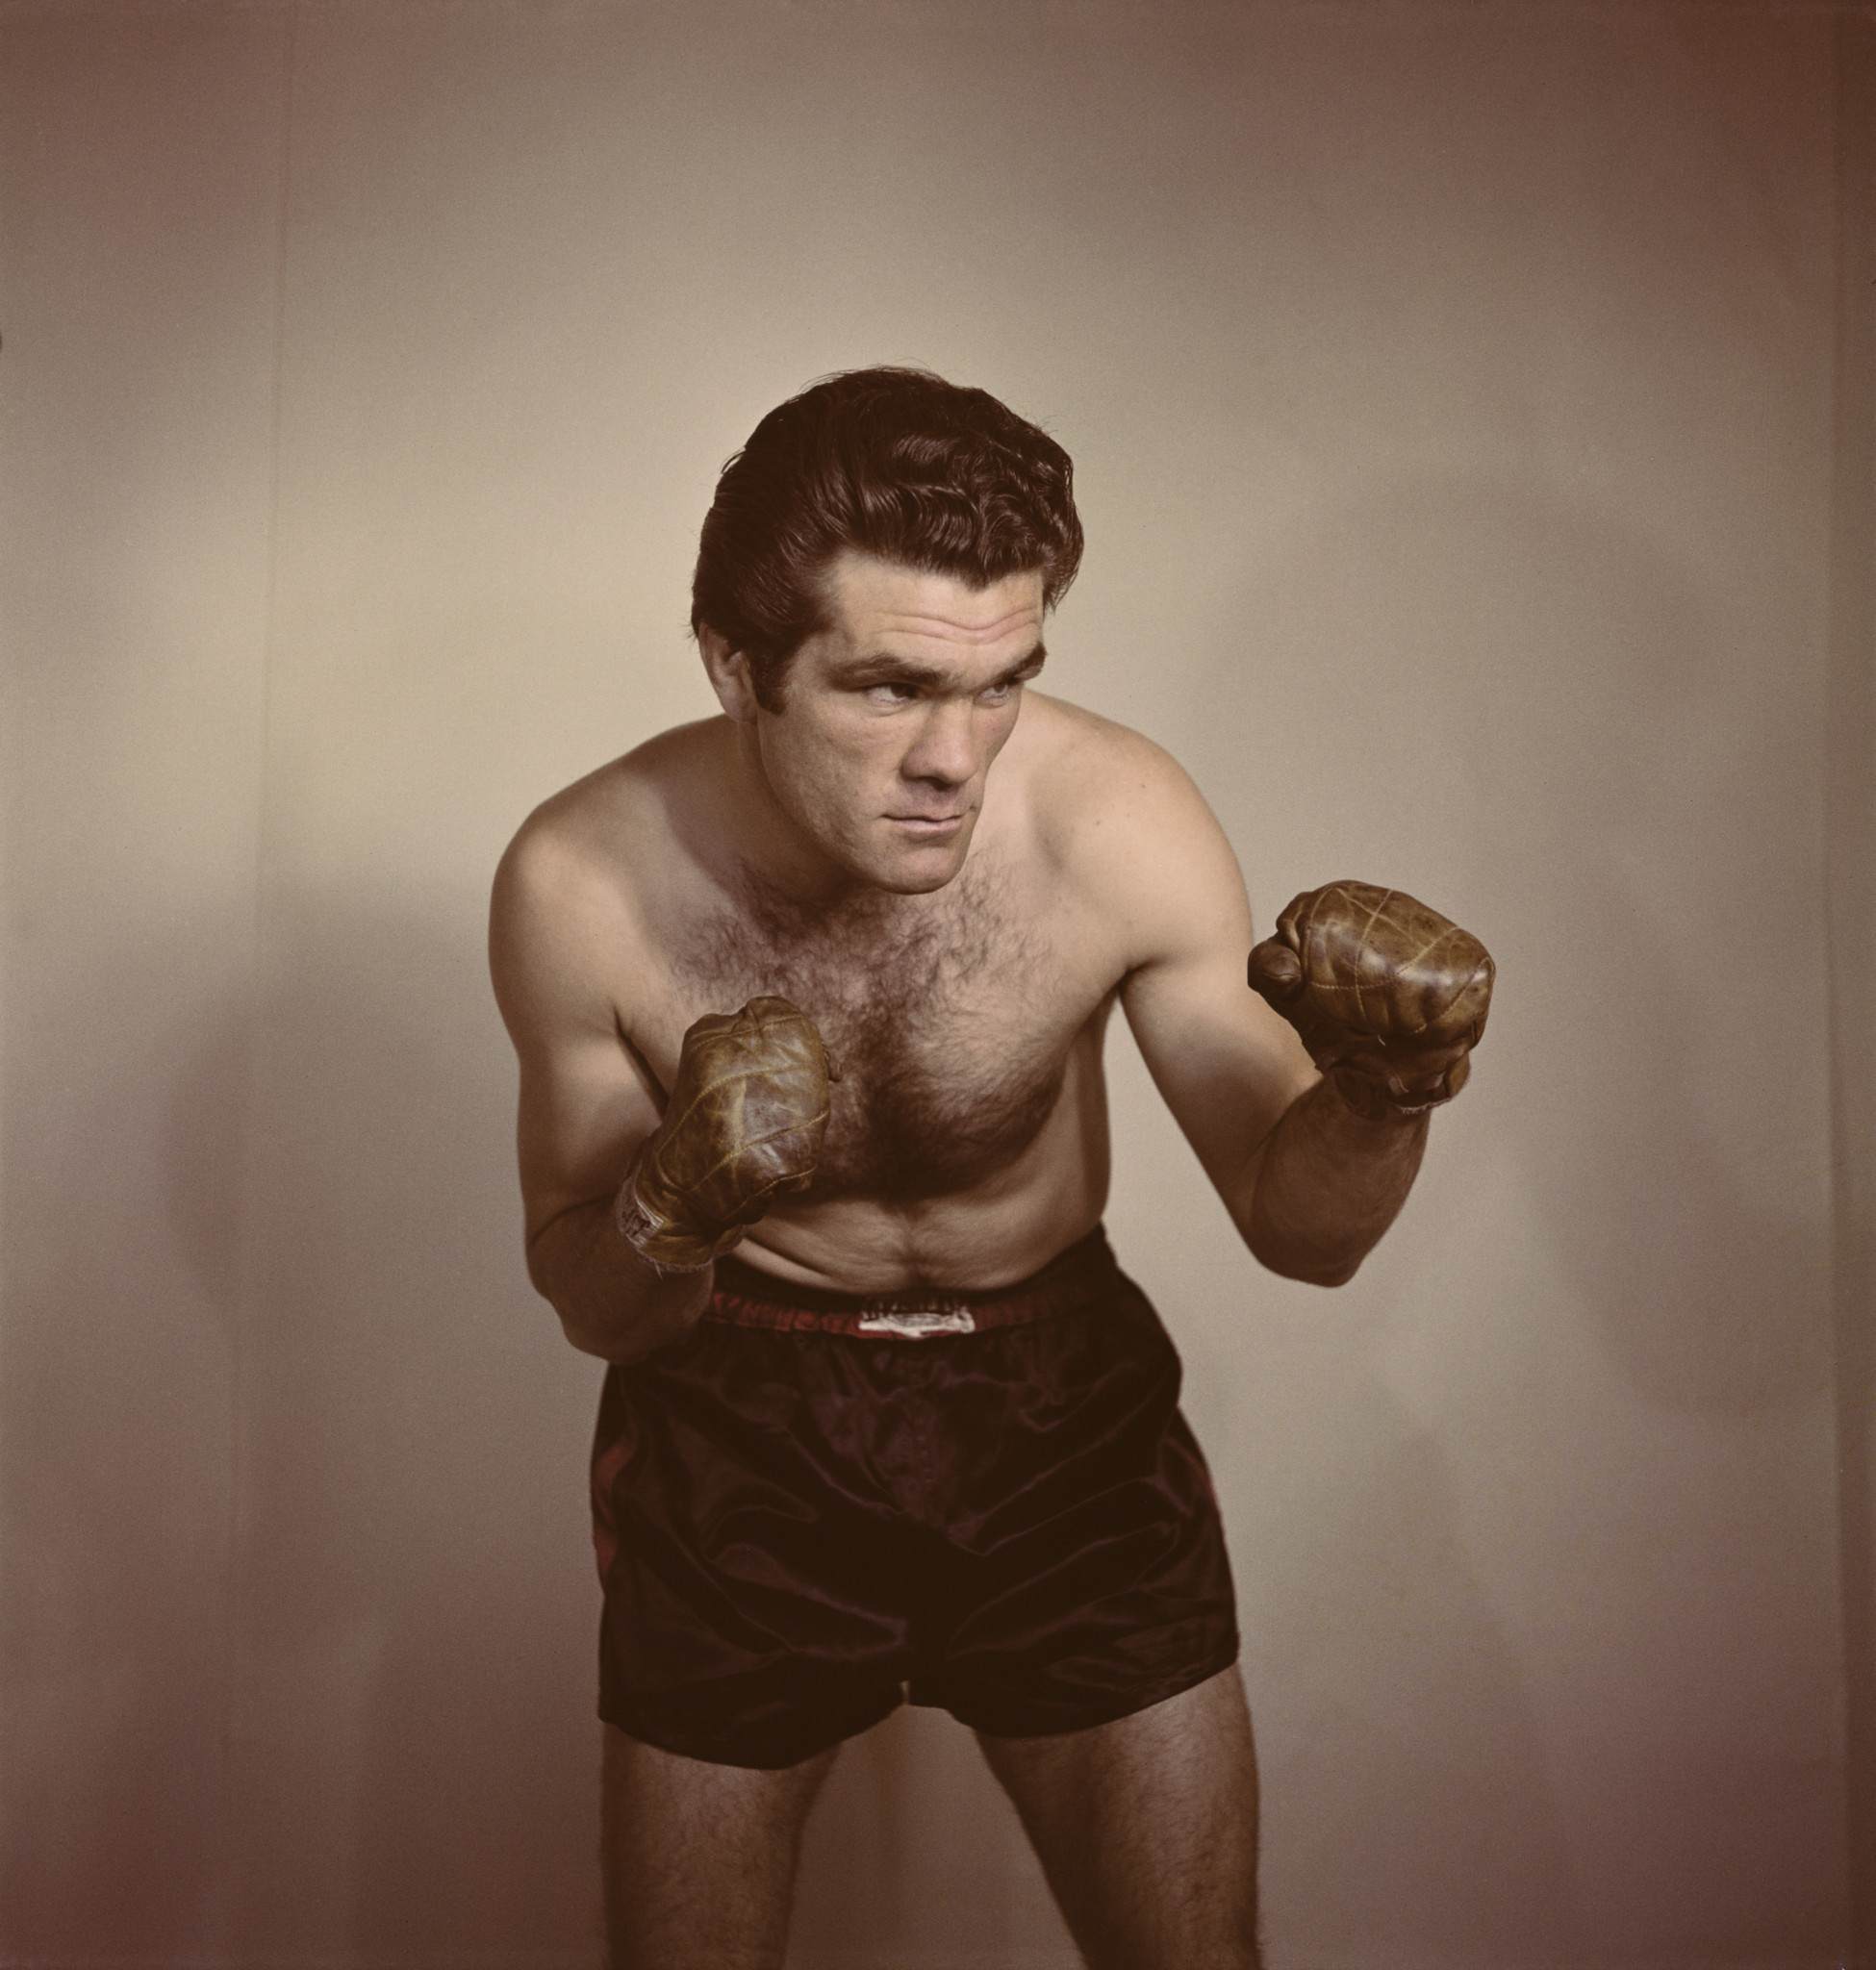 Freddie Mills of Great Britain, the world light heavyweight champion, on June 1, 1948 in London ©Getty Images